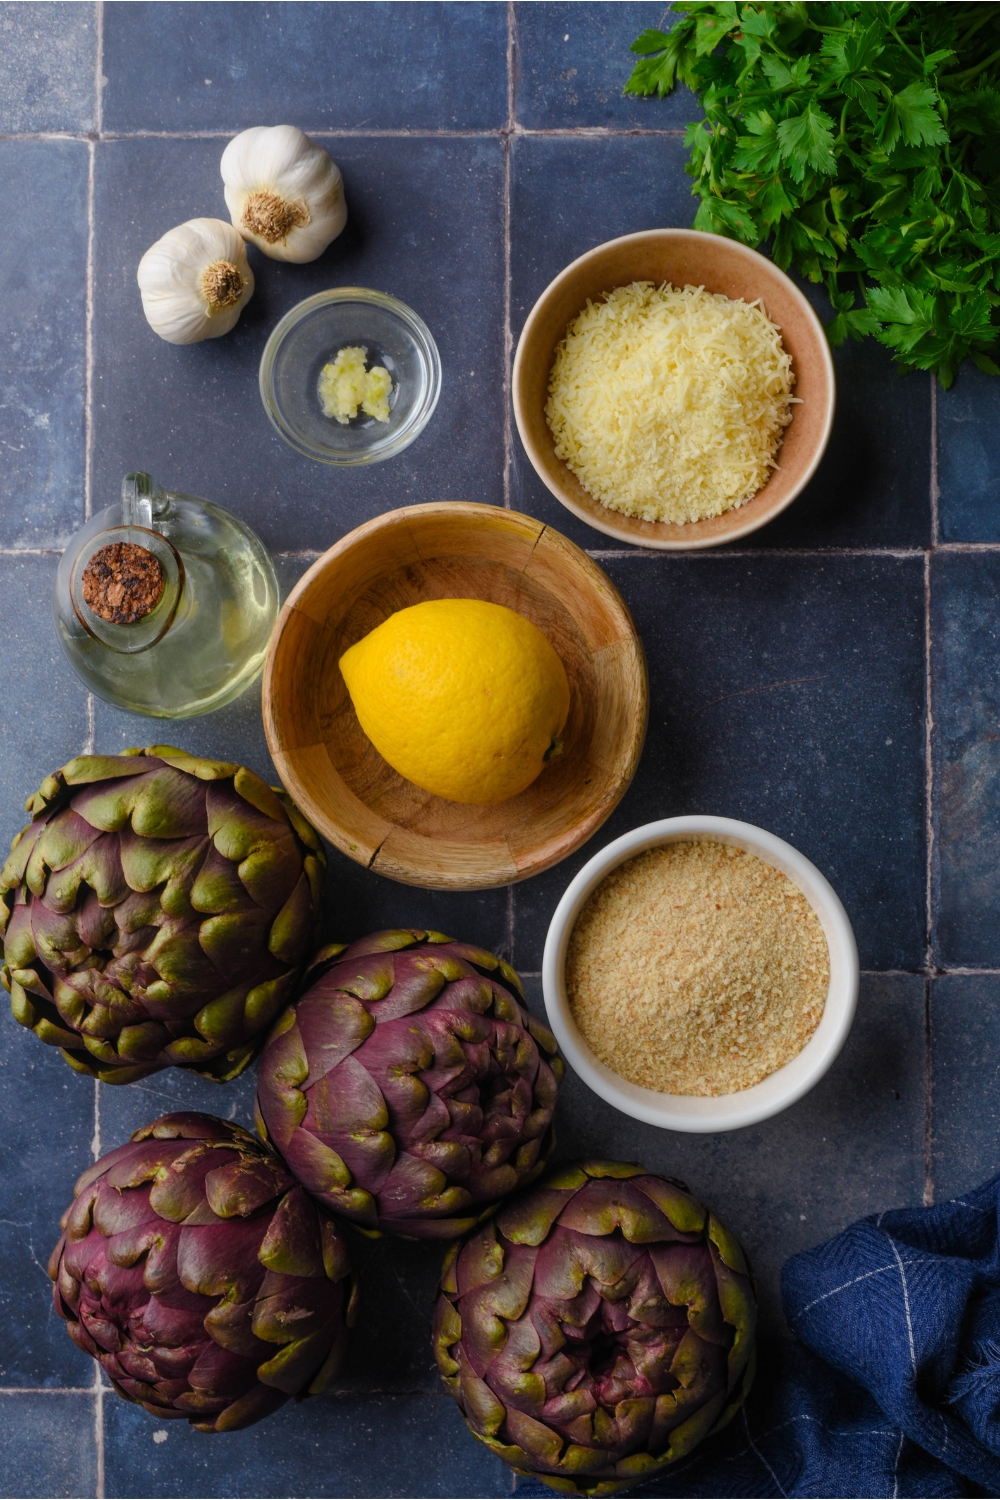 An assortment of ingredients including four whole artichokes and bowls of bread crumbs, parmesan cheese, garlic, one whole lemon, and a bottle of oil.